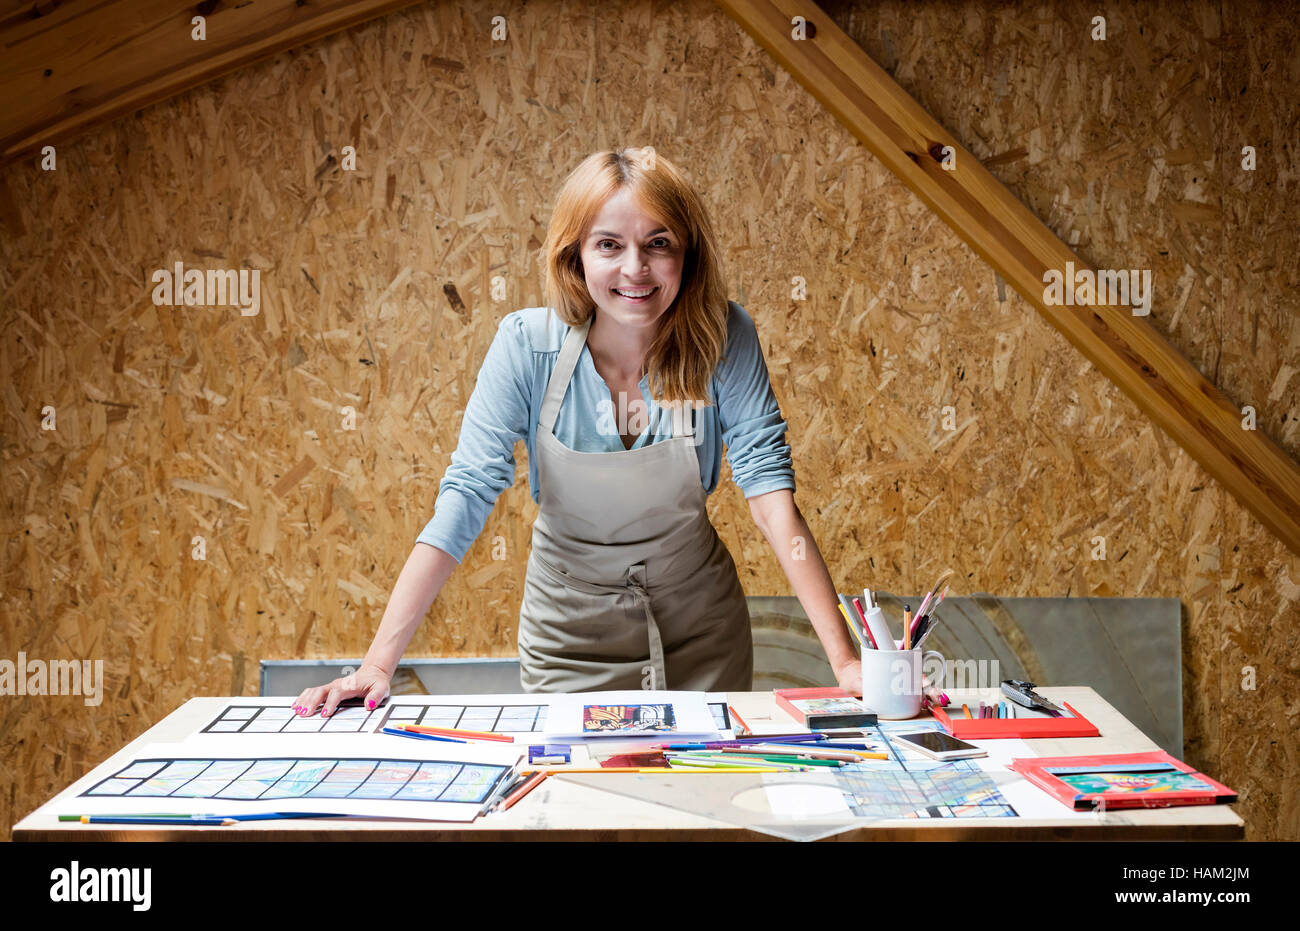 Portrait smiling stained glass artist working in studio Stock Photo